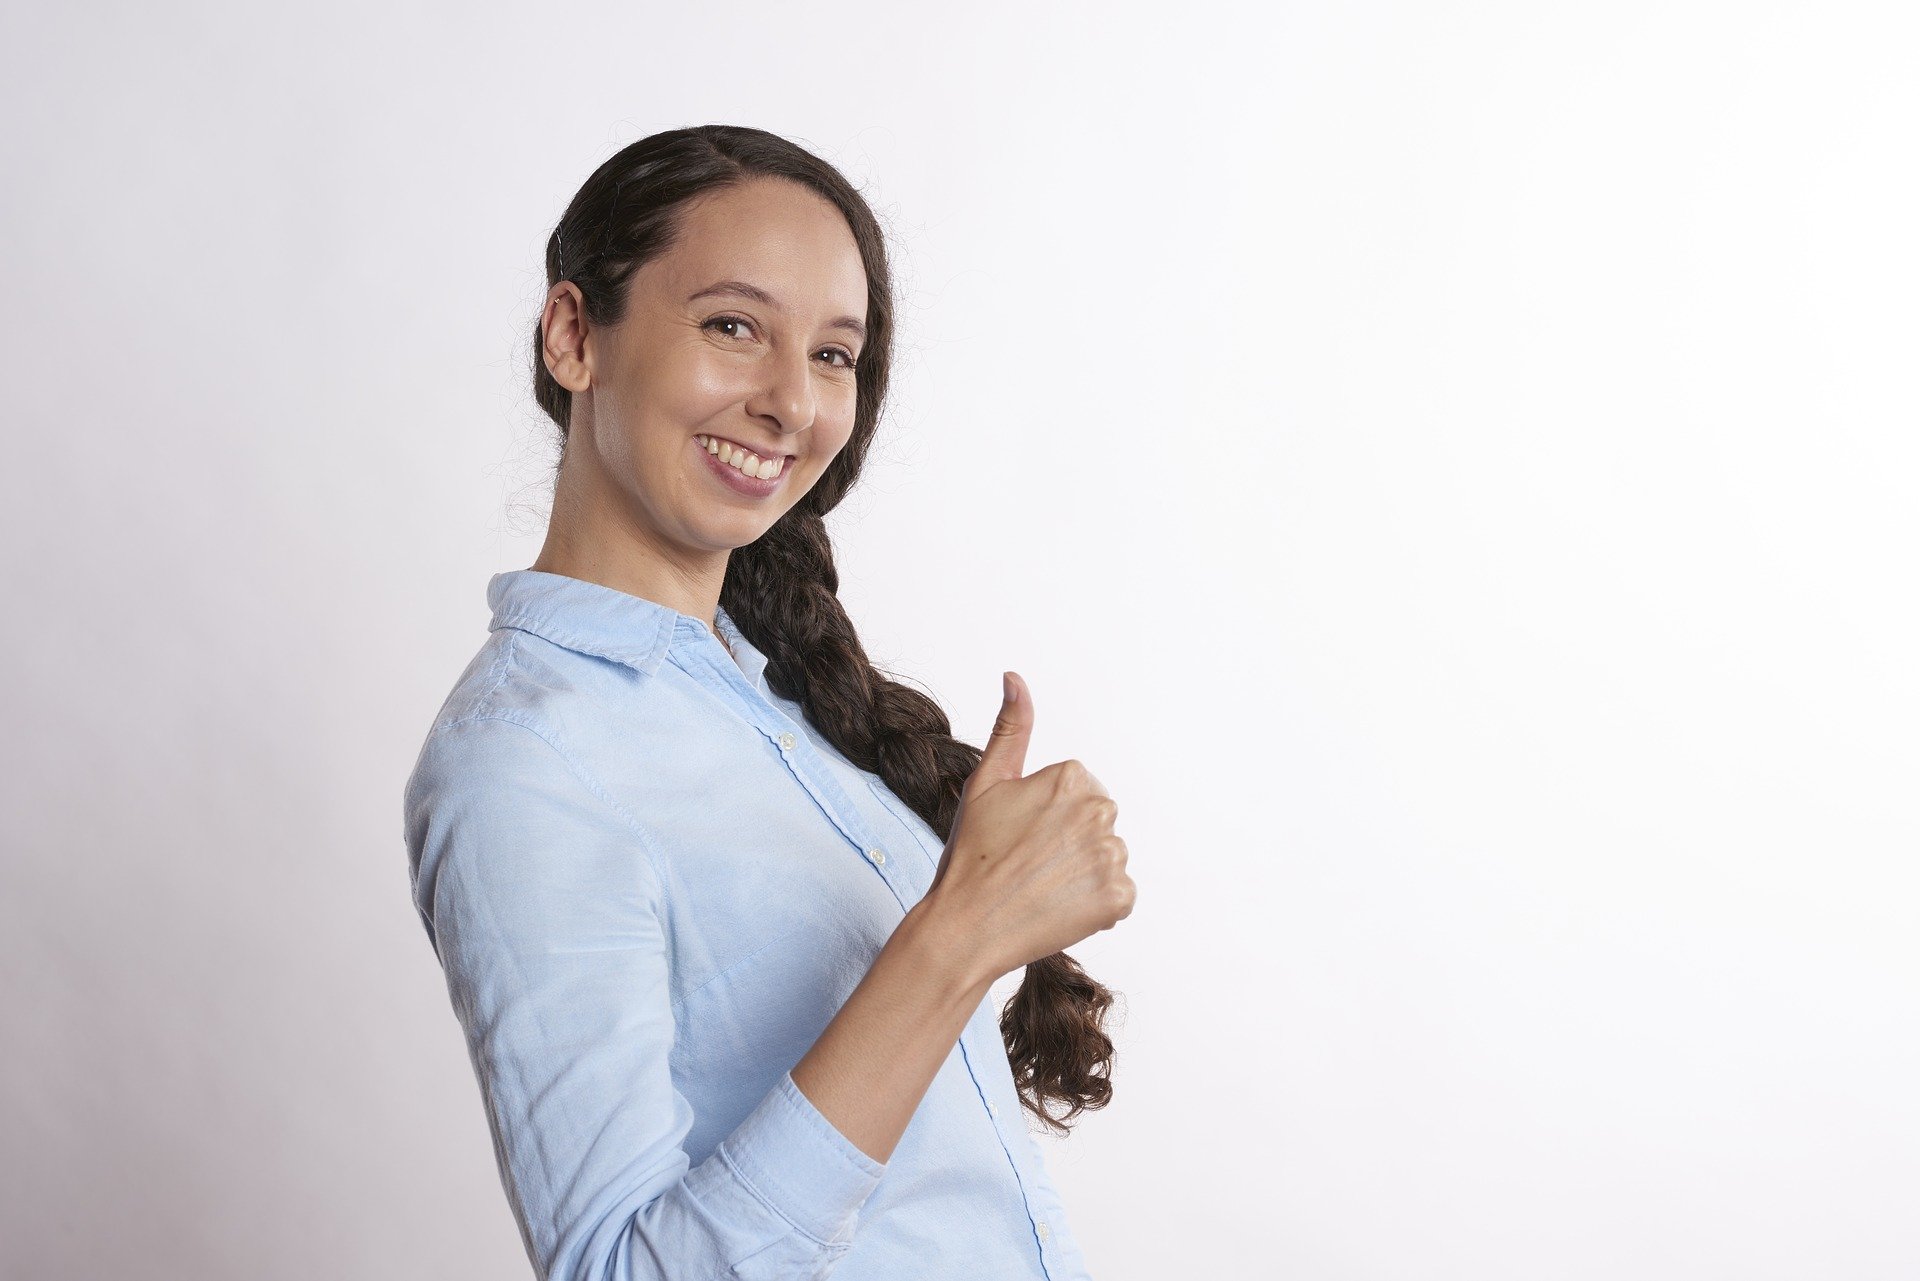 A smiling girl in a blue blouse raises her thumb up.